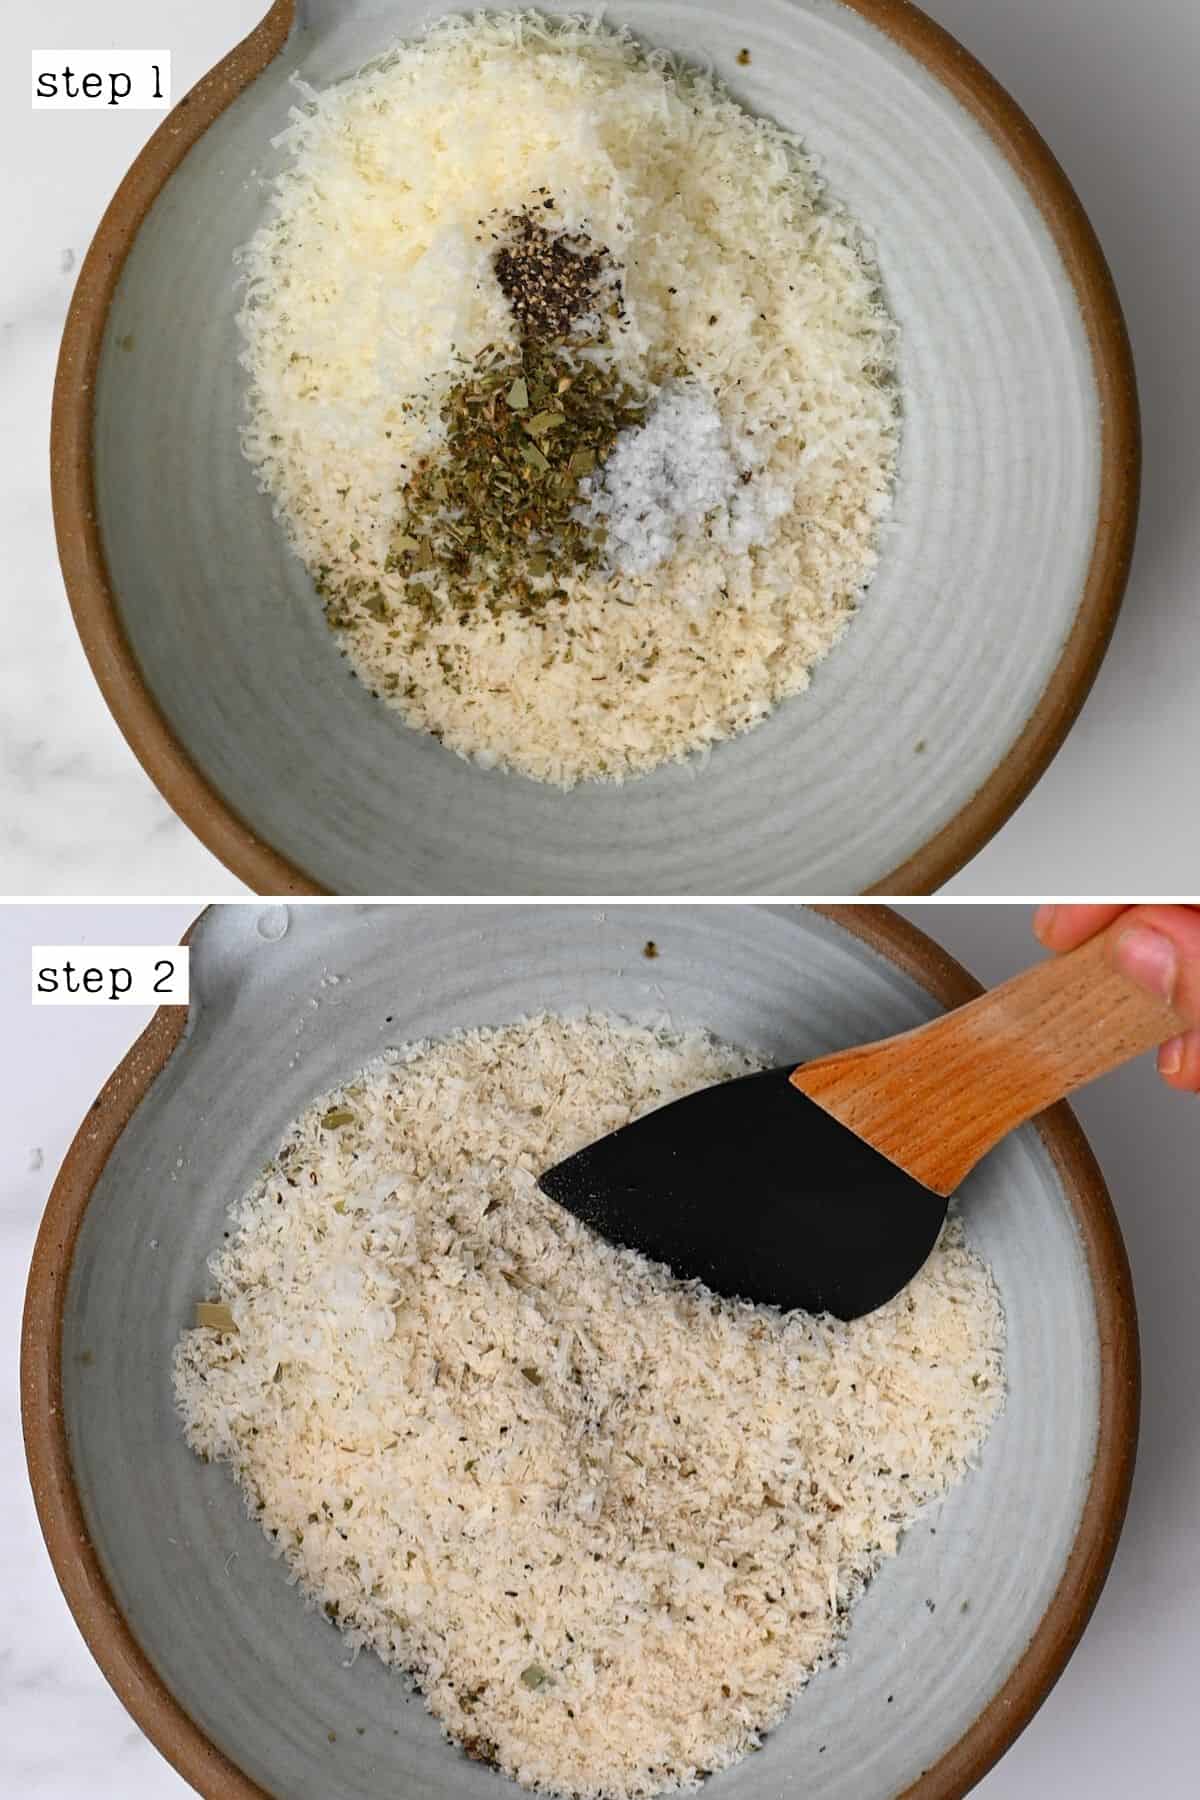 Steps for mixing breadcrumbs with parmesan and spices